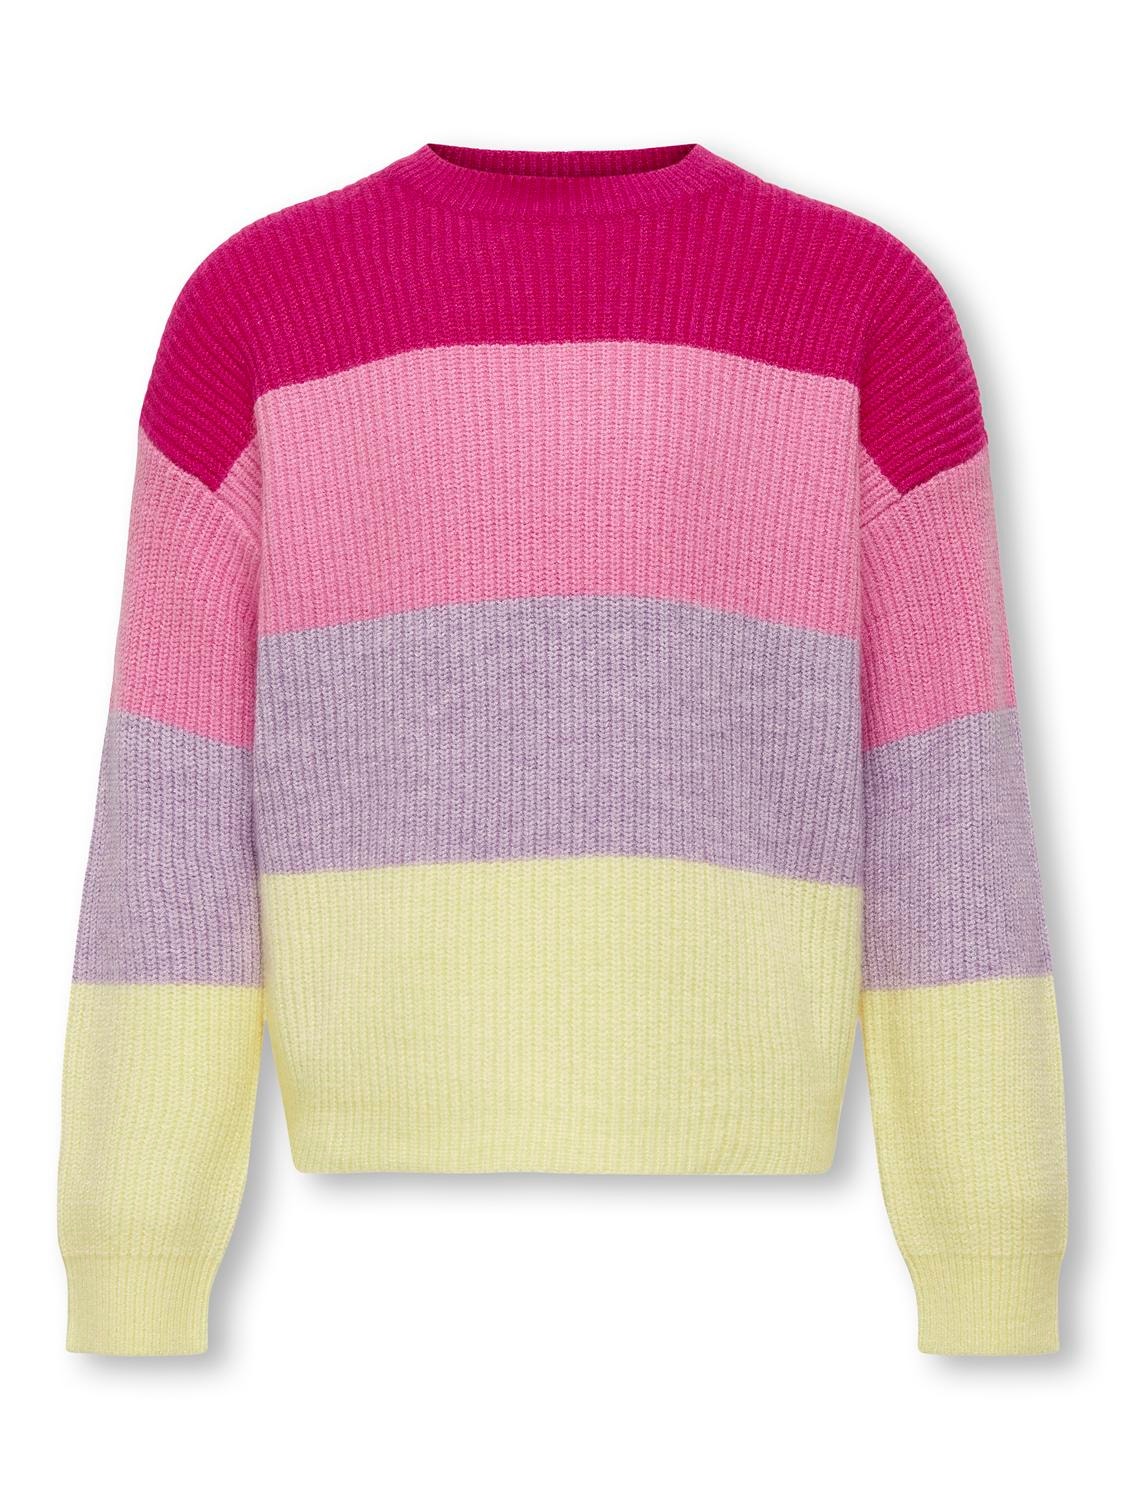 ONLY Striped Knitted Pullover -Fuchsia Purple - 15207169